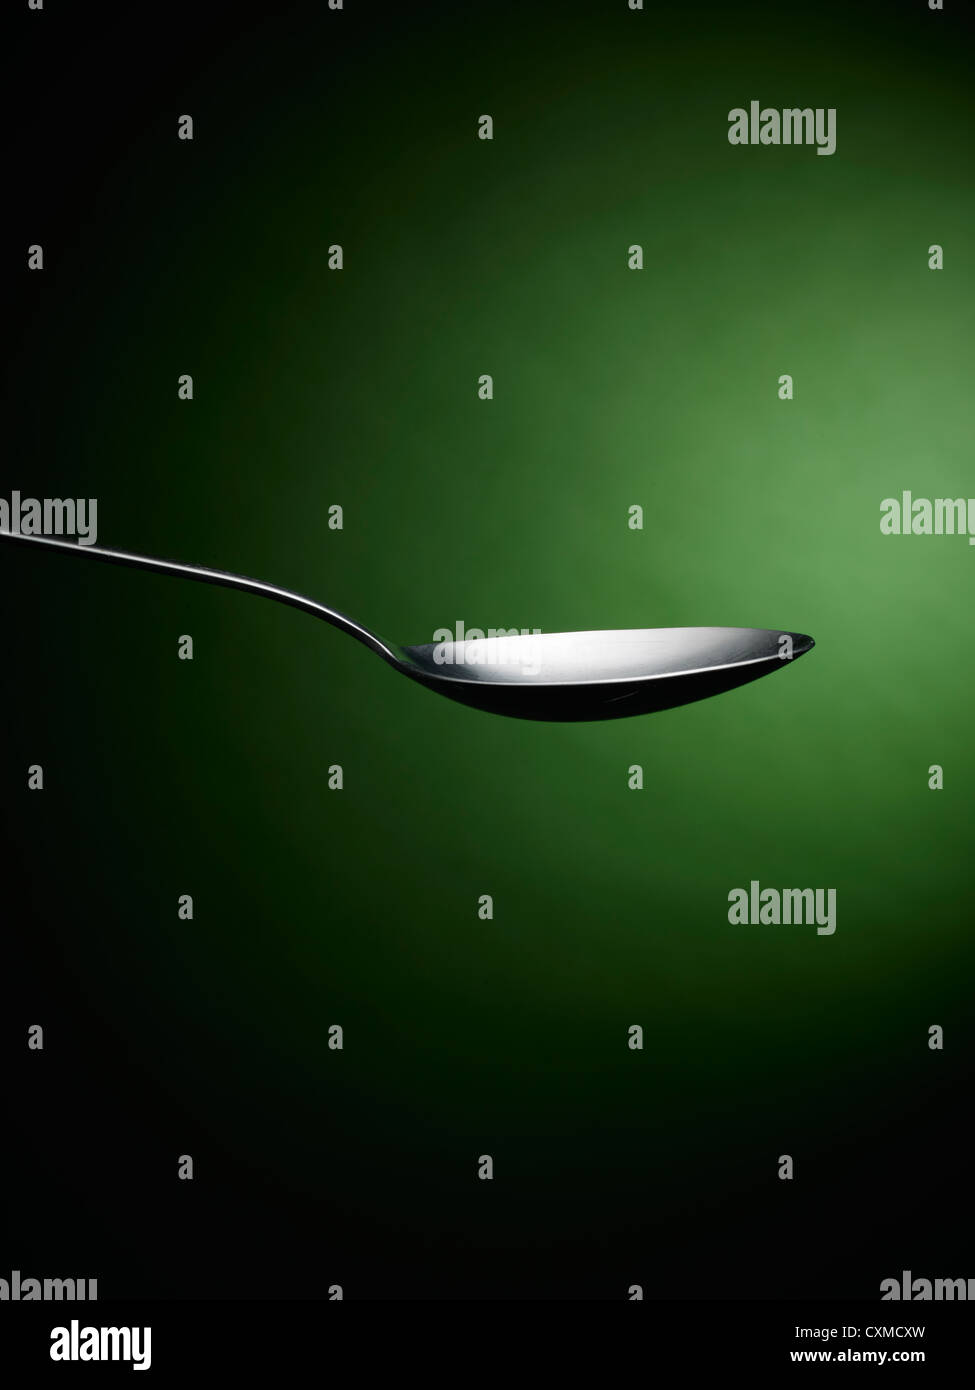 Spoon on a green background Stock Photo